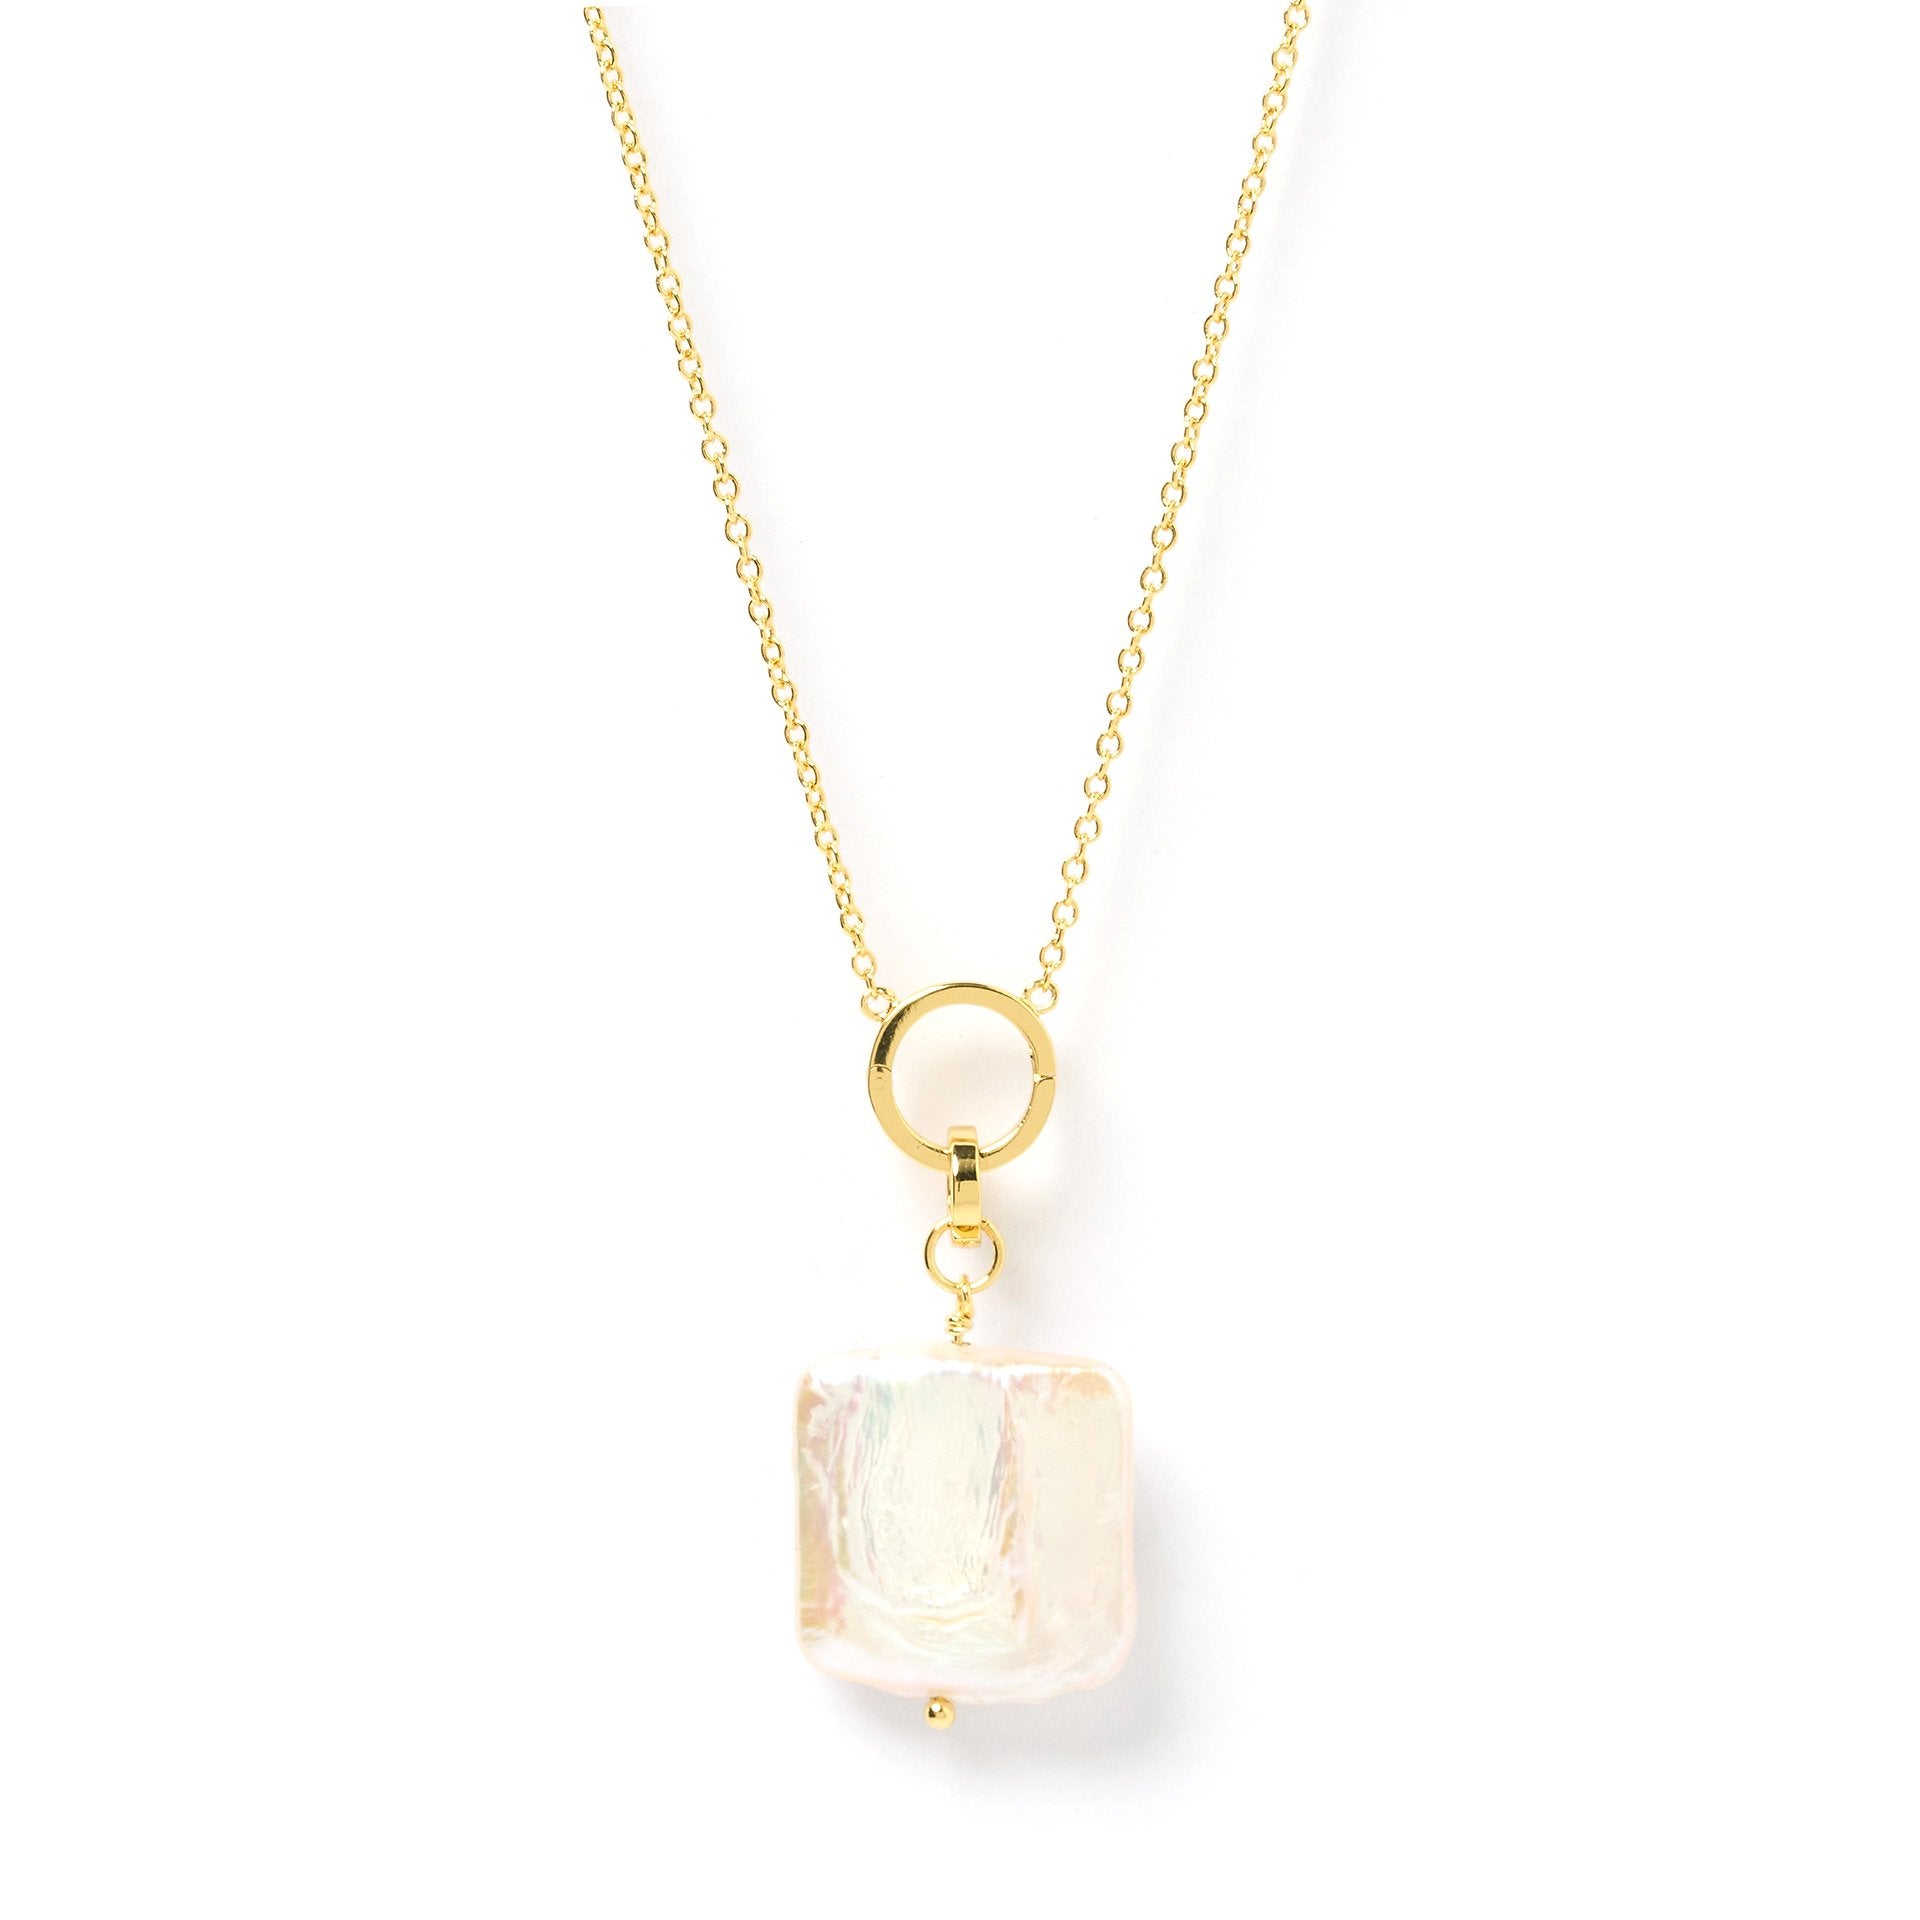 Arms Of Eve Una pearl 'O' charm gold necklace with square pearl pendant, perfect for adding touch of elegance to any outfit